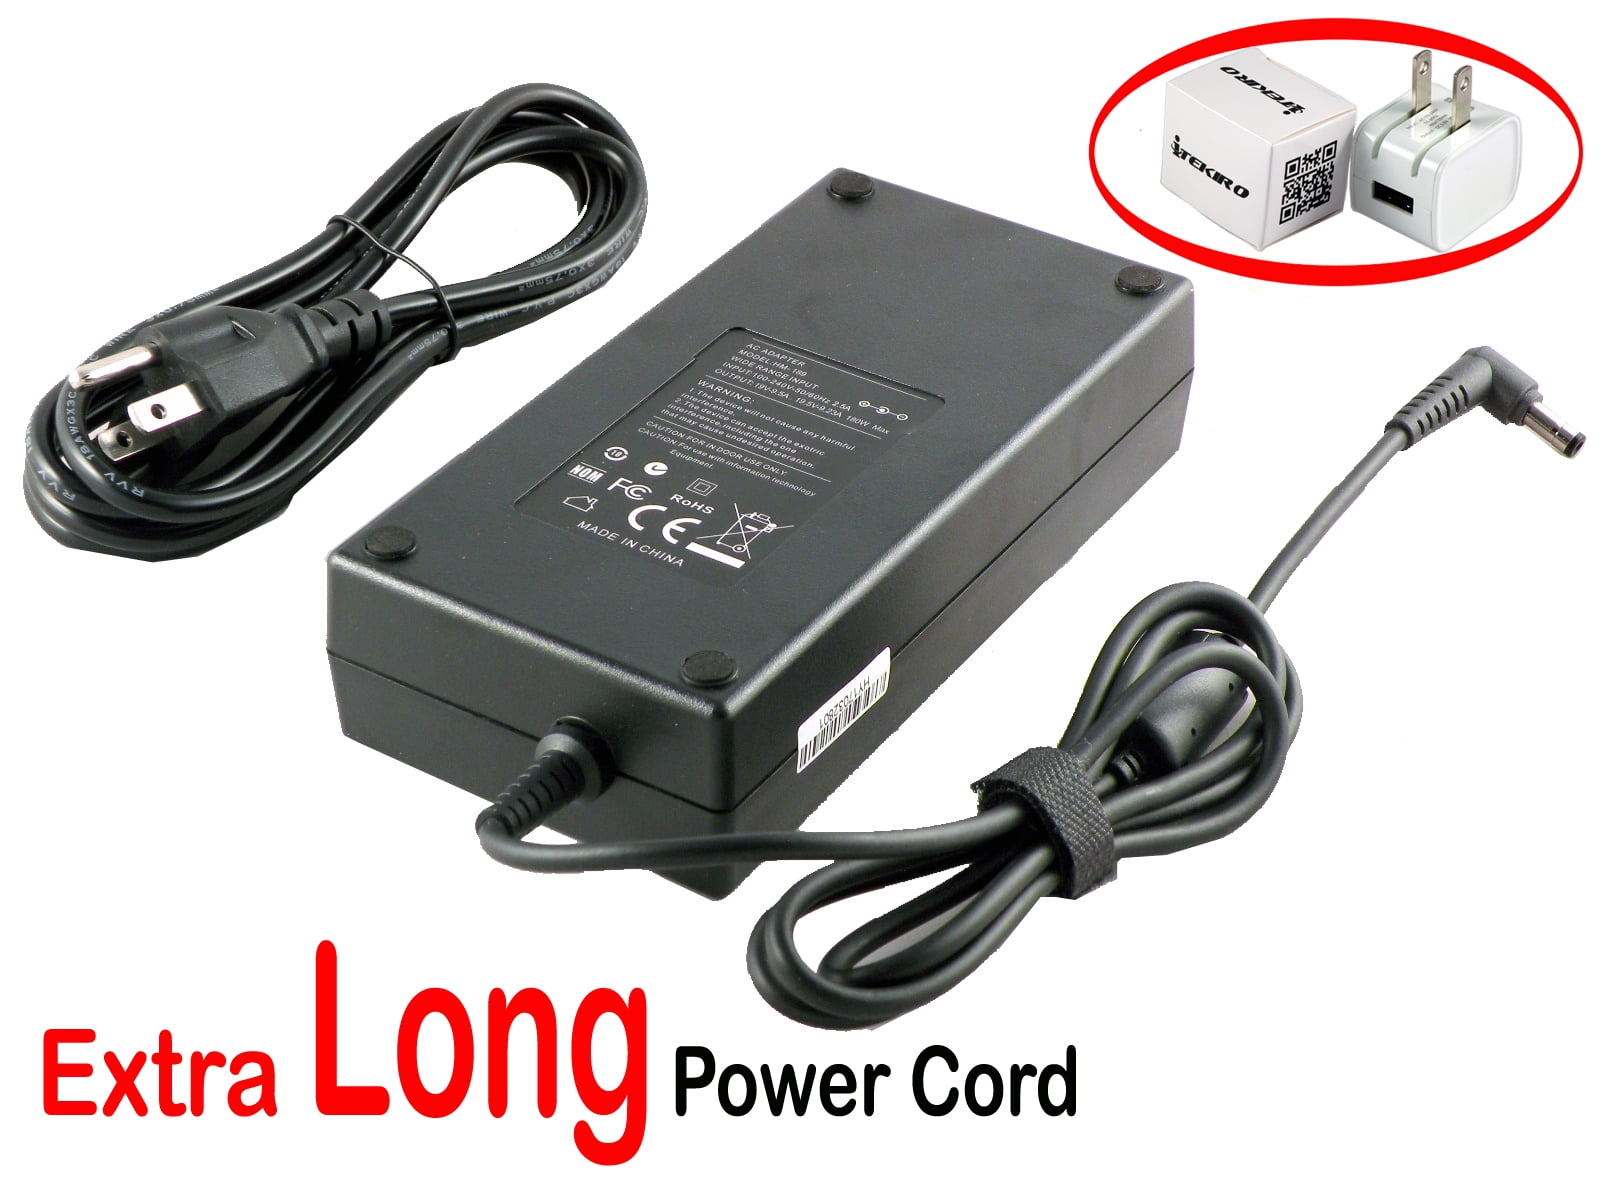 Accessory USA AC DC Adapter for MSI GT70 Dominator-891;GT70 Dominator-892; GT70 Dominator-893; GT70 Dominator-894; GT70 Dominator 895;GT70 Dominator Pro-1039; GT70 Dominator Pro-888